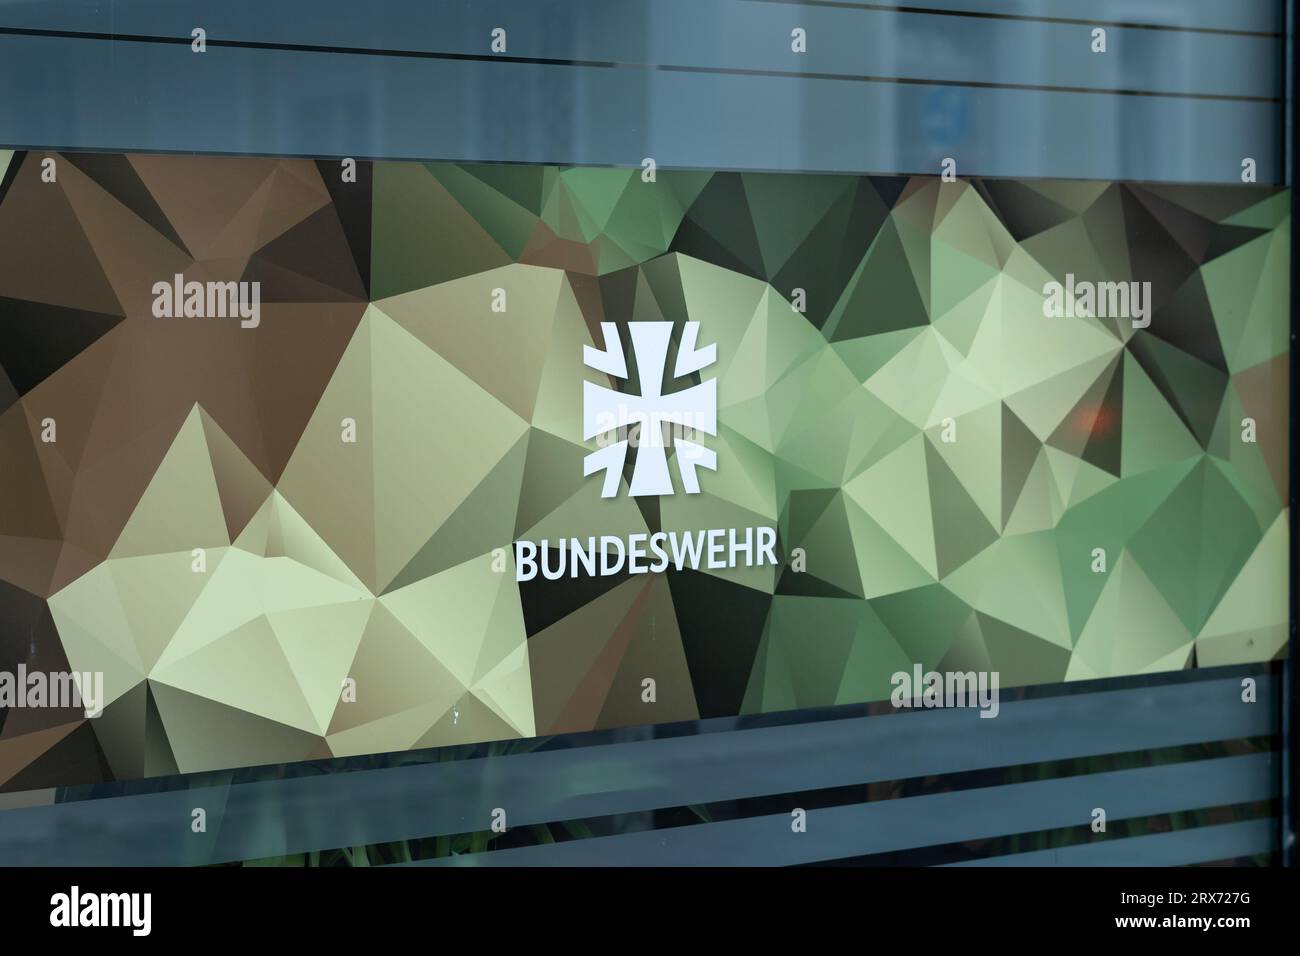 Bundeswehr (German Armed Forces) logo sign on a building exterior. Career office of the German Army in a Bavarian town. Working for the Government. Stock Photo